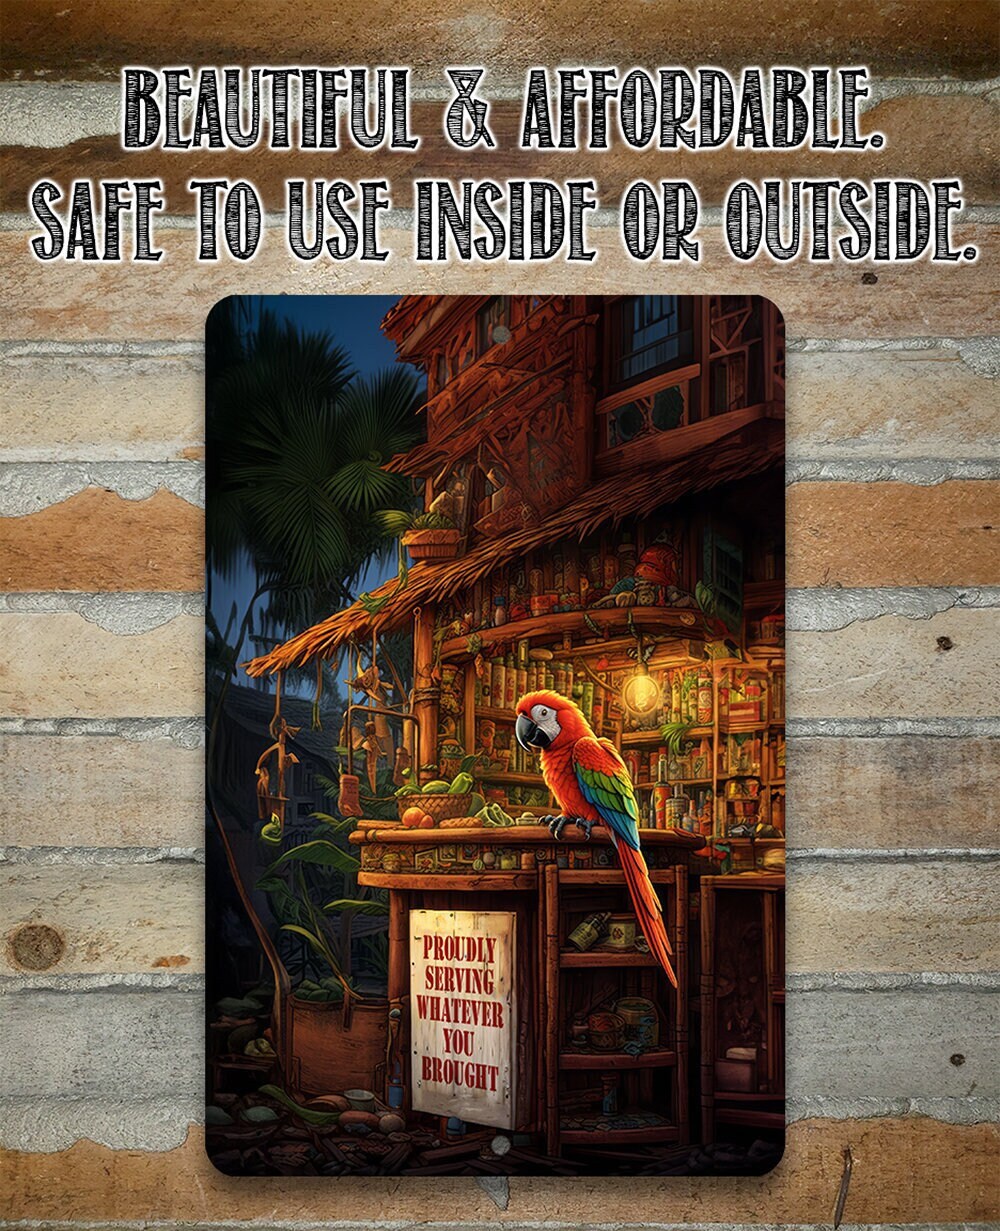 Tin - Tiki Parrot Bars - Durable 8"x12" or 12"x18" Metal Signs - Indoor or Outdoor - Makes a Great Gift and Funny Decor